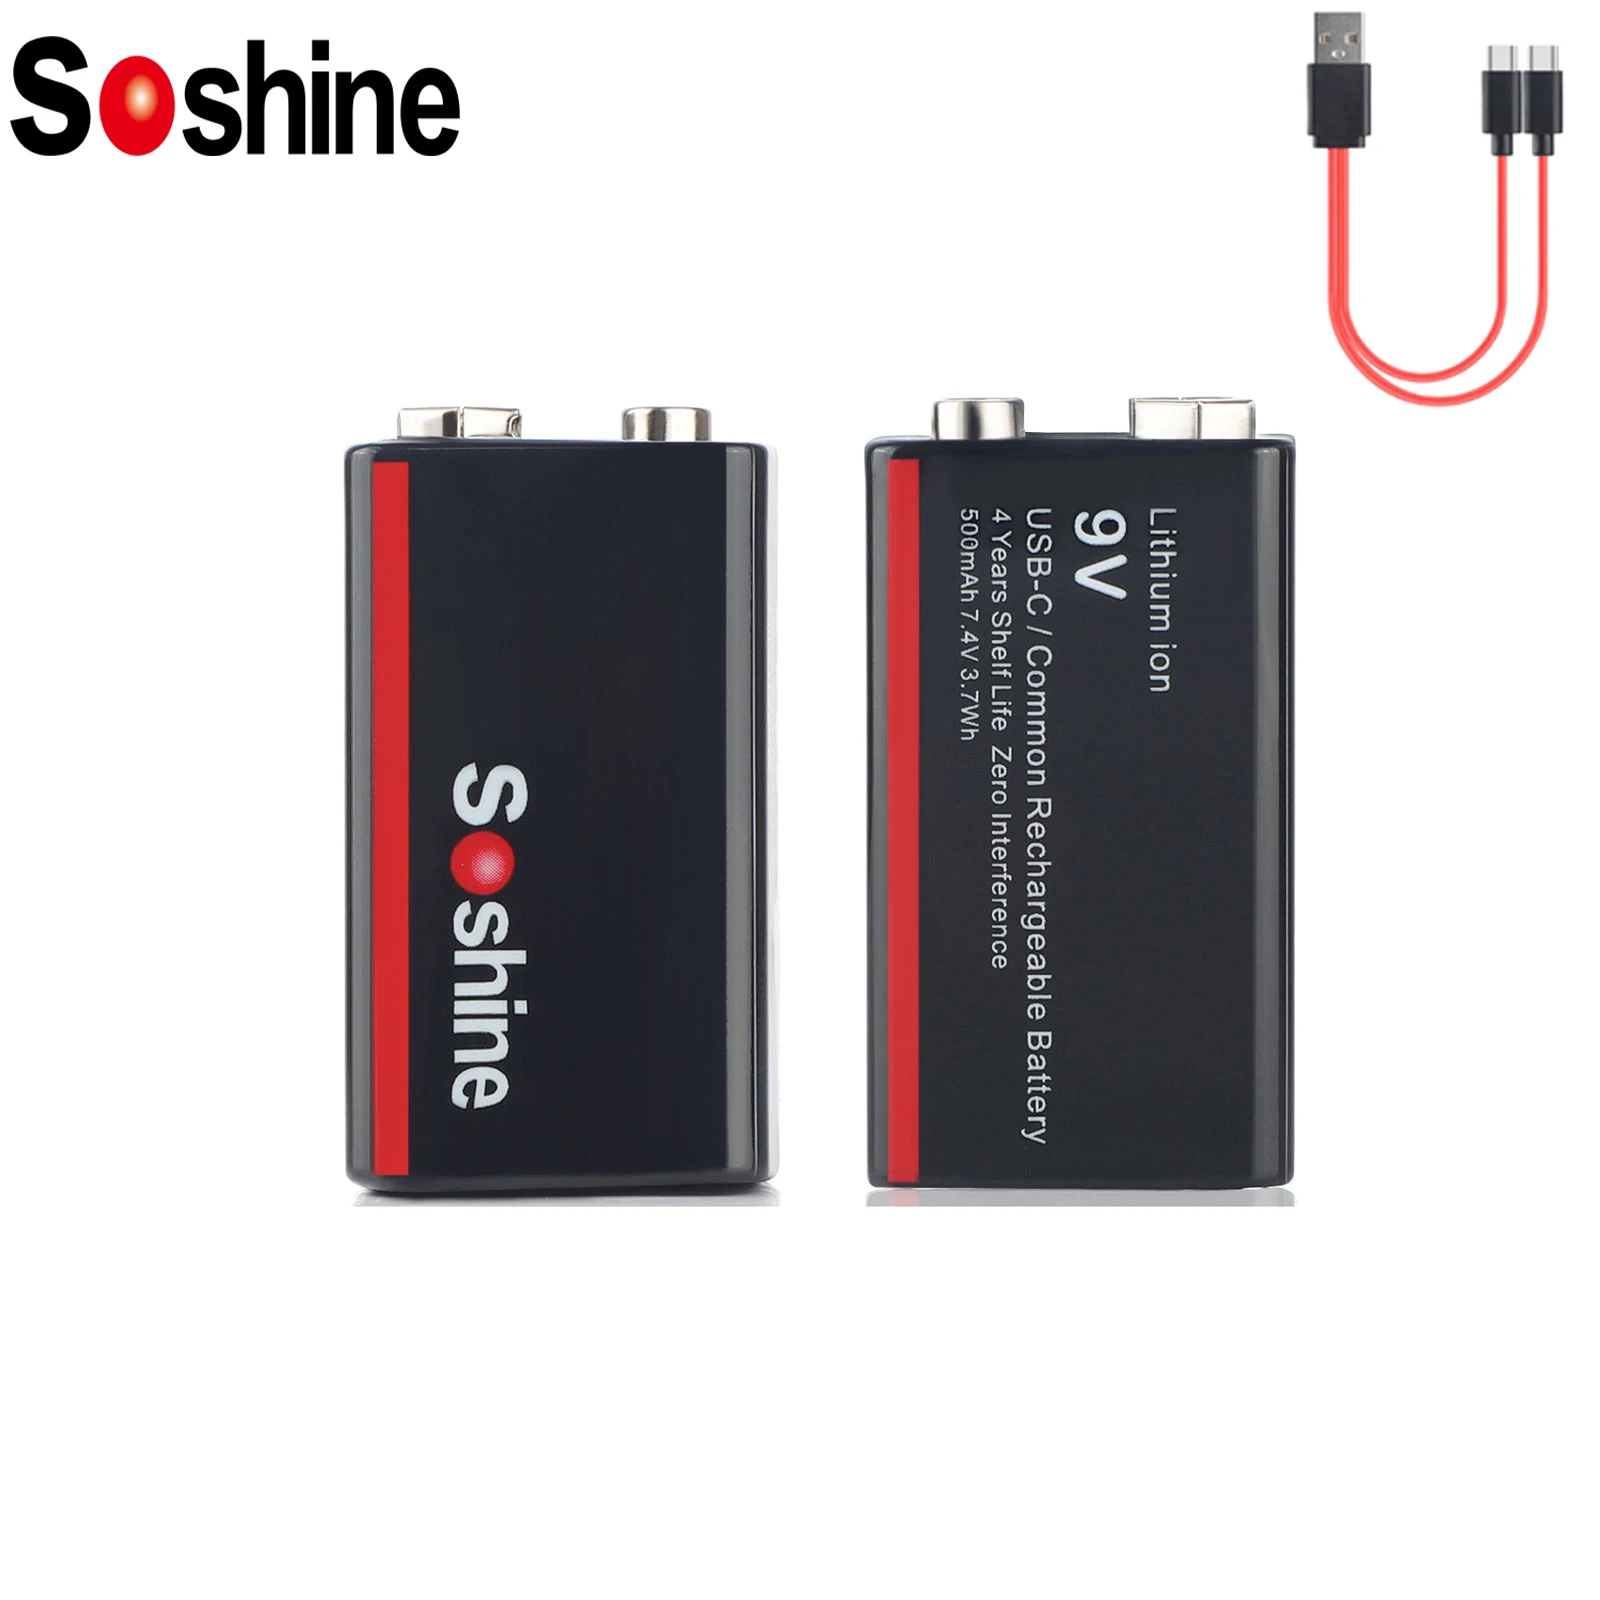 

Soshine 500mAh Li-ion Rechargeable Batteries USB 9V Low Self-discharge Lithium-ion Battery for Electric Guitar Medical Devices